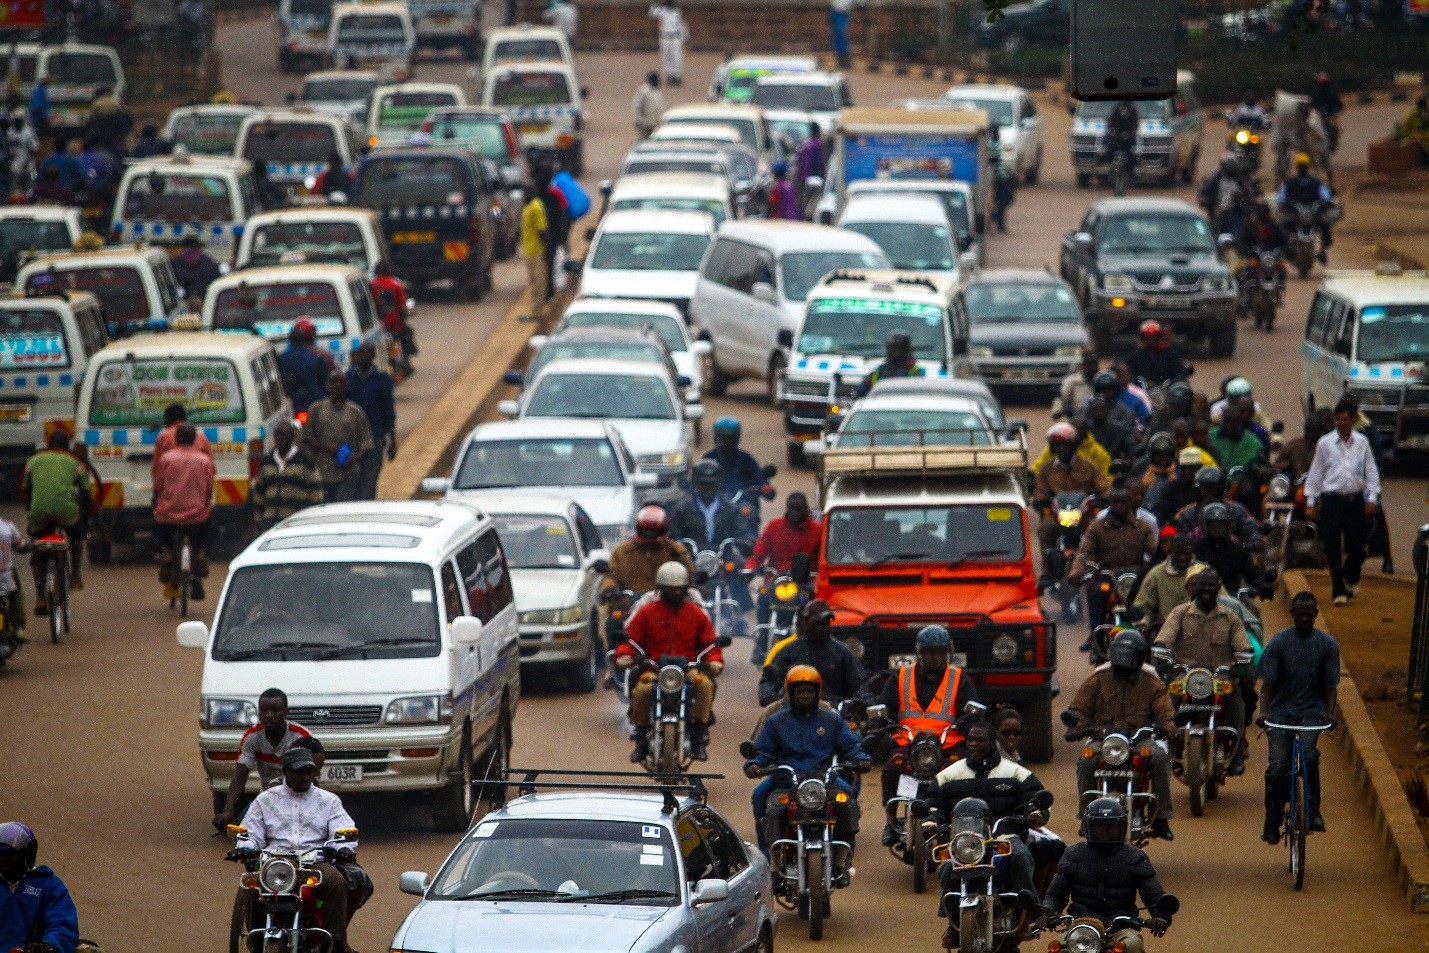 photo of busy street in Uganda filled with cars and motorcycles, Tugende Limited, OPIC, Overseas Private Investment Corporation, Uganda, financing, emerging markets, public diplomacy, private sector, development finance, doing business in Africa, infrastructure, lease to own financing, motorcycle taxi, Connect Africa